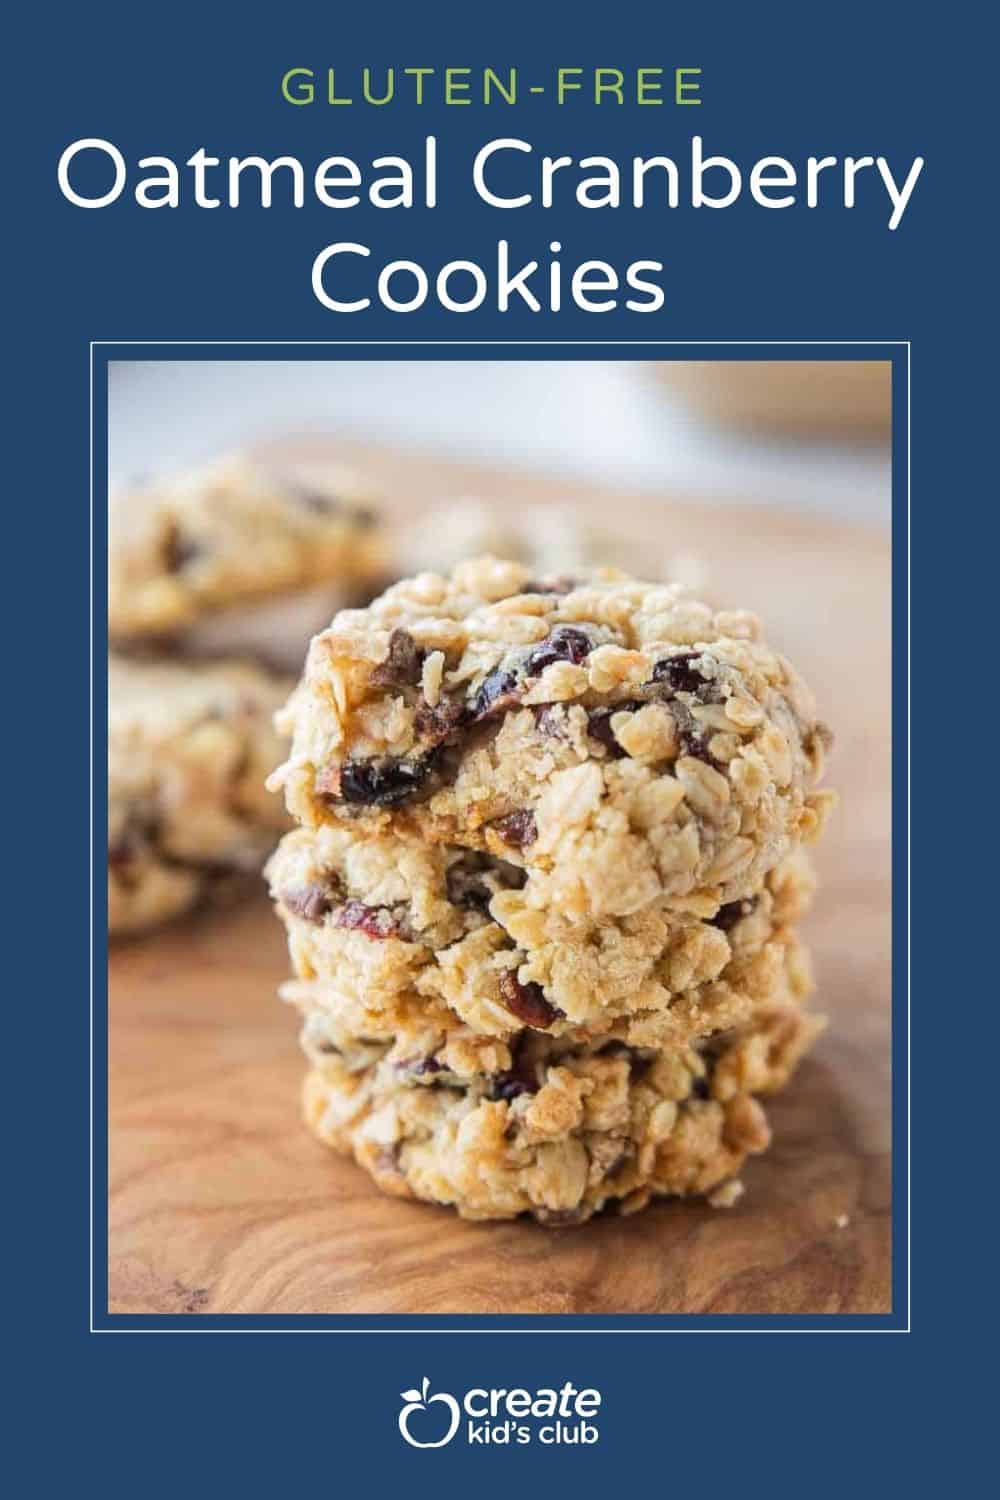 pin of gluten free oatmeal cranberry cookies